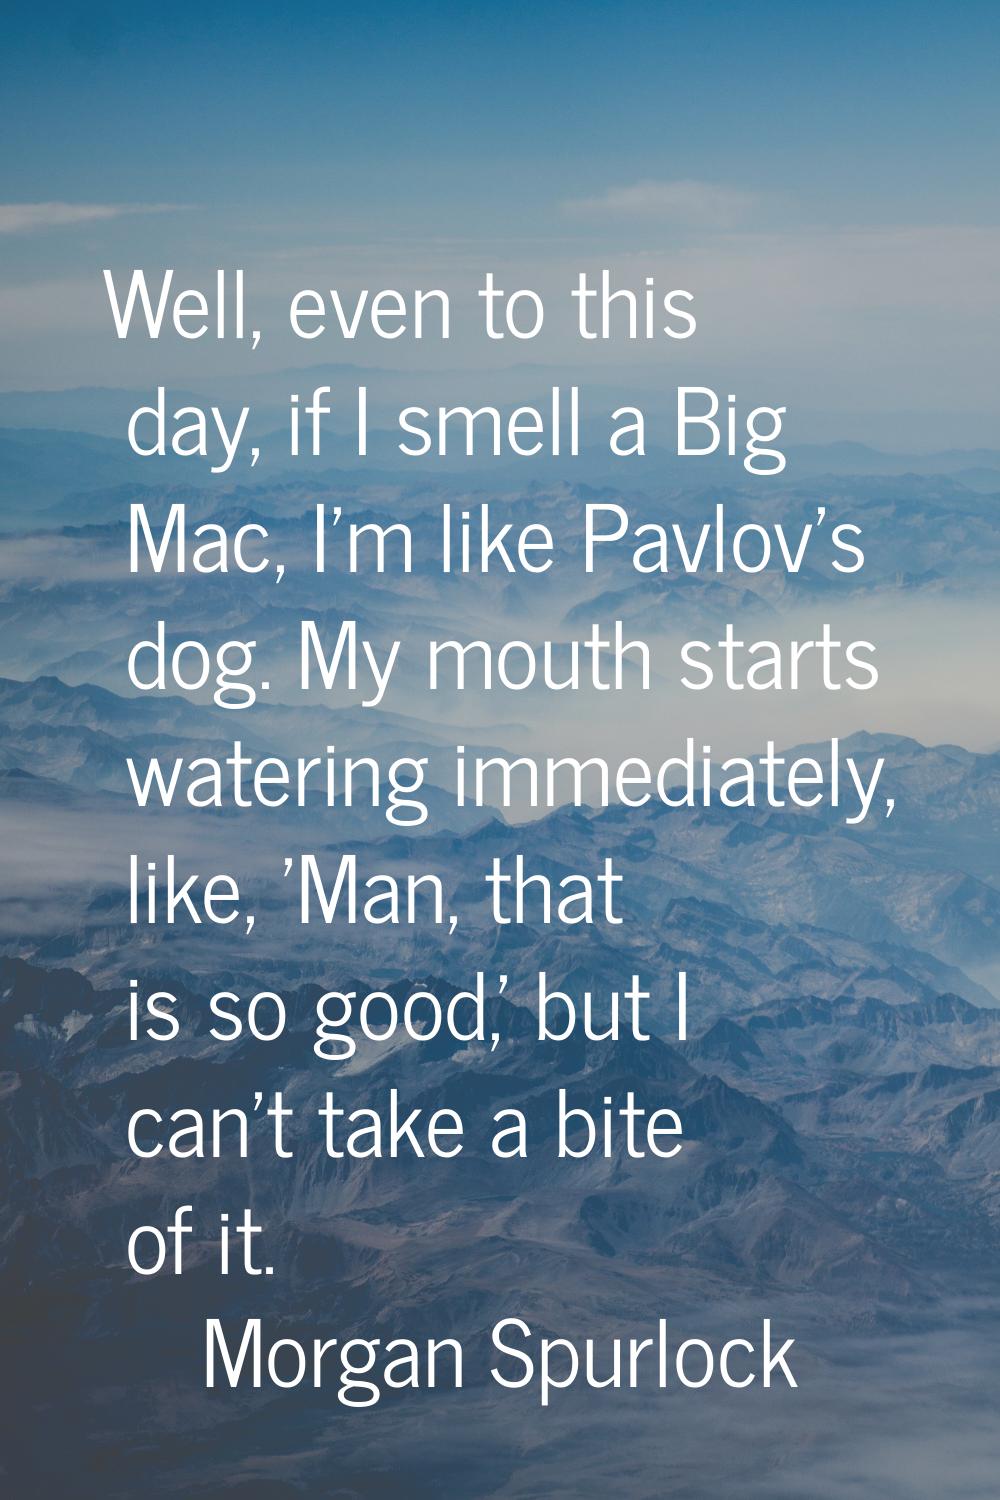 Well, even to this day, if I smell a Big Mac, I'm like Pavlov's dog. My mouth starts watering immed